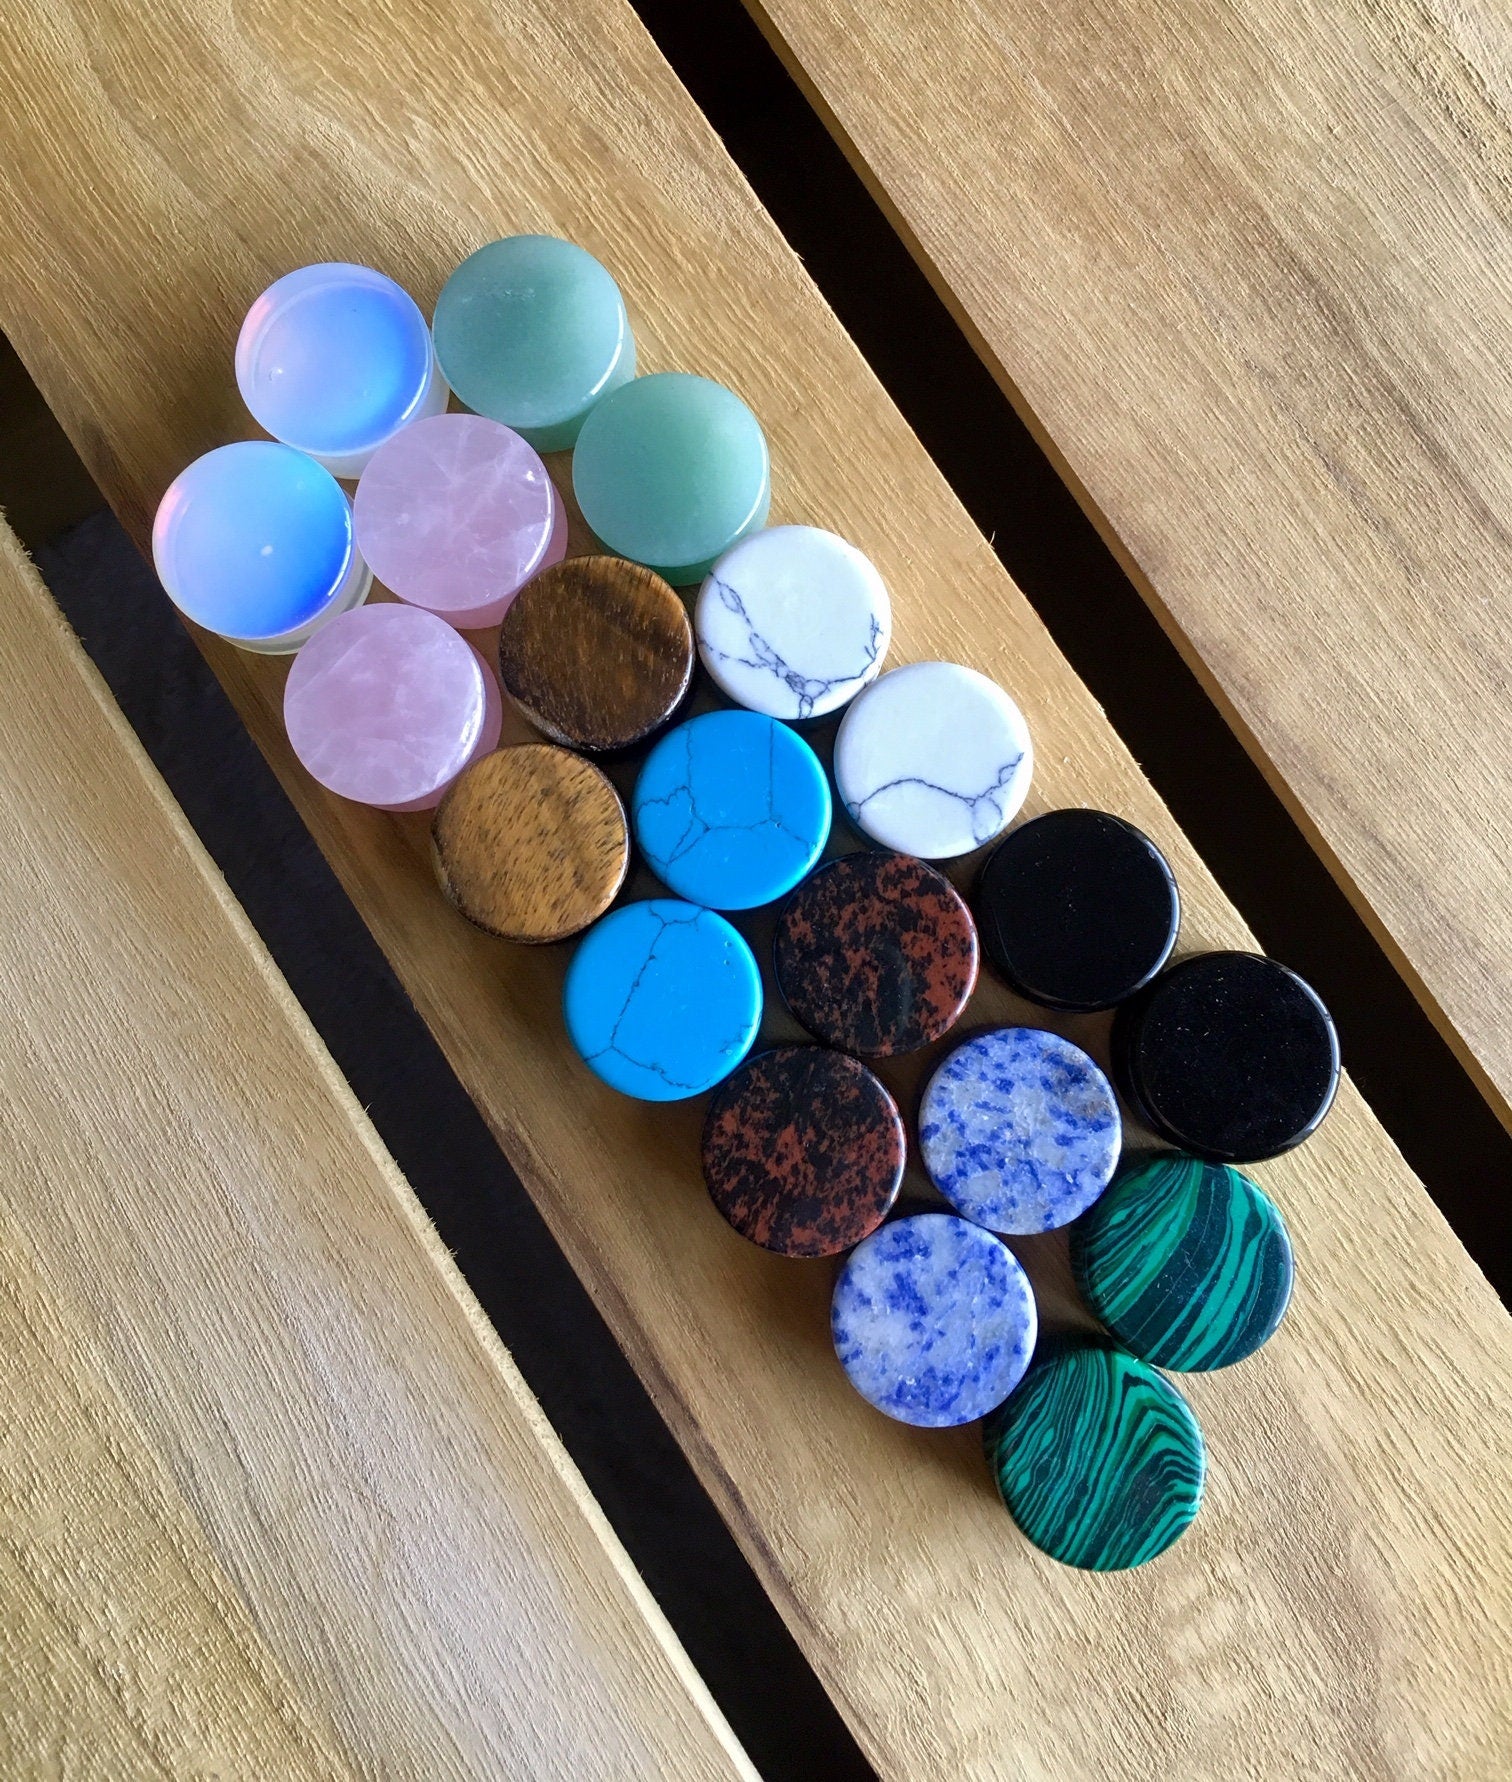 ALL 10 PAIR of Organic Double Flare Stone Plugs - Value Pack - Gauges 6g (4mm) through 1" (25mm) available!